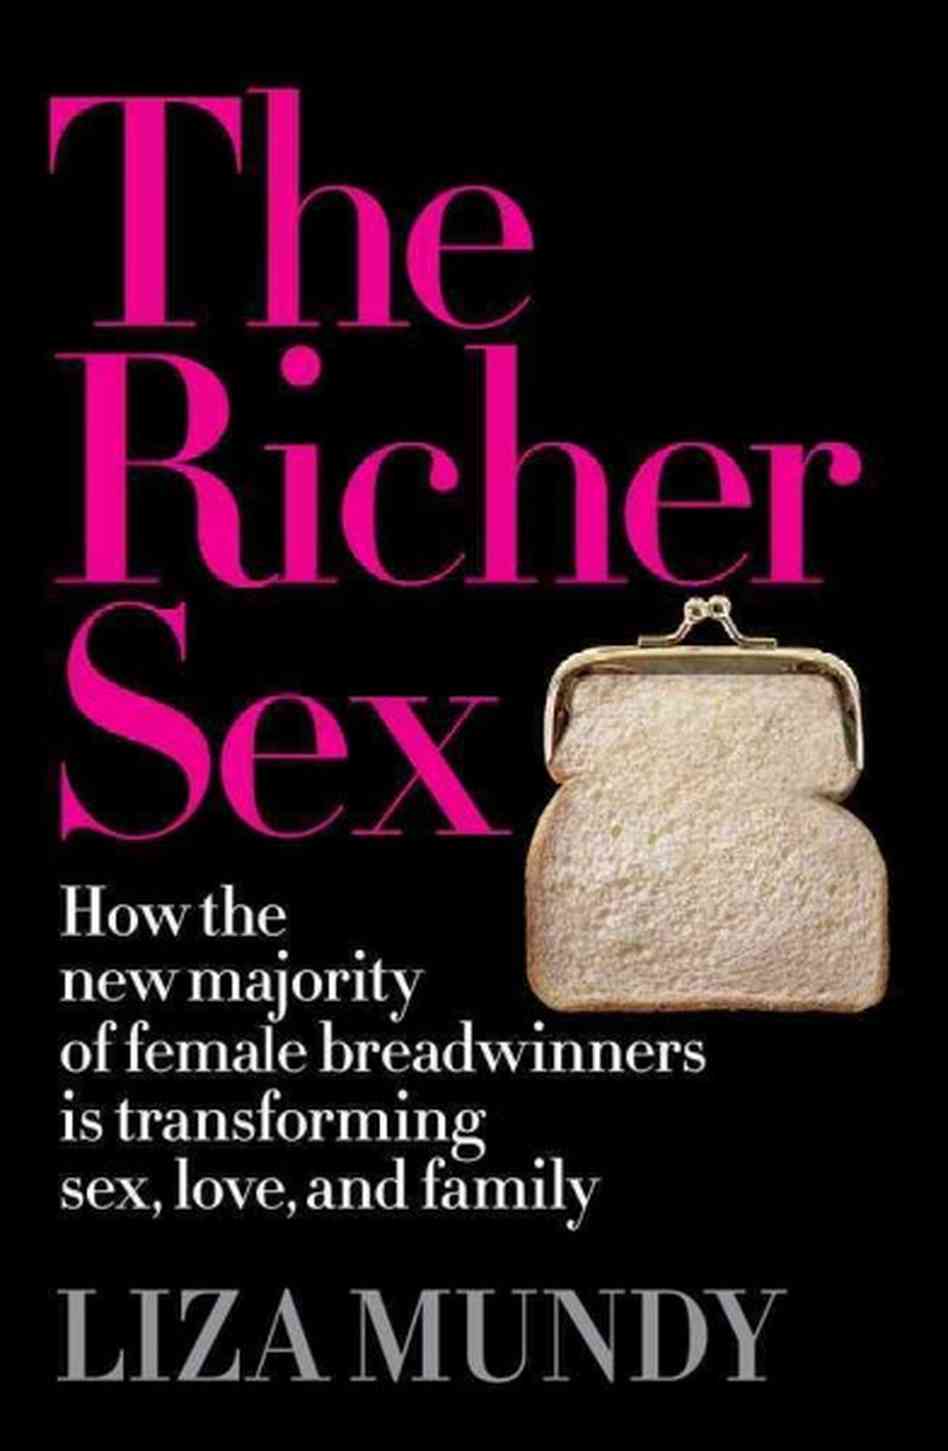 Book Review of The Richer Sex by Liza Mundy